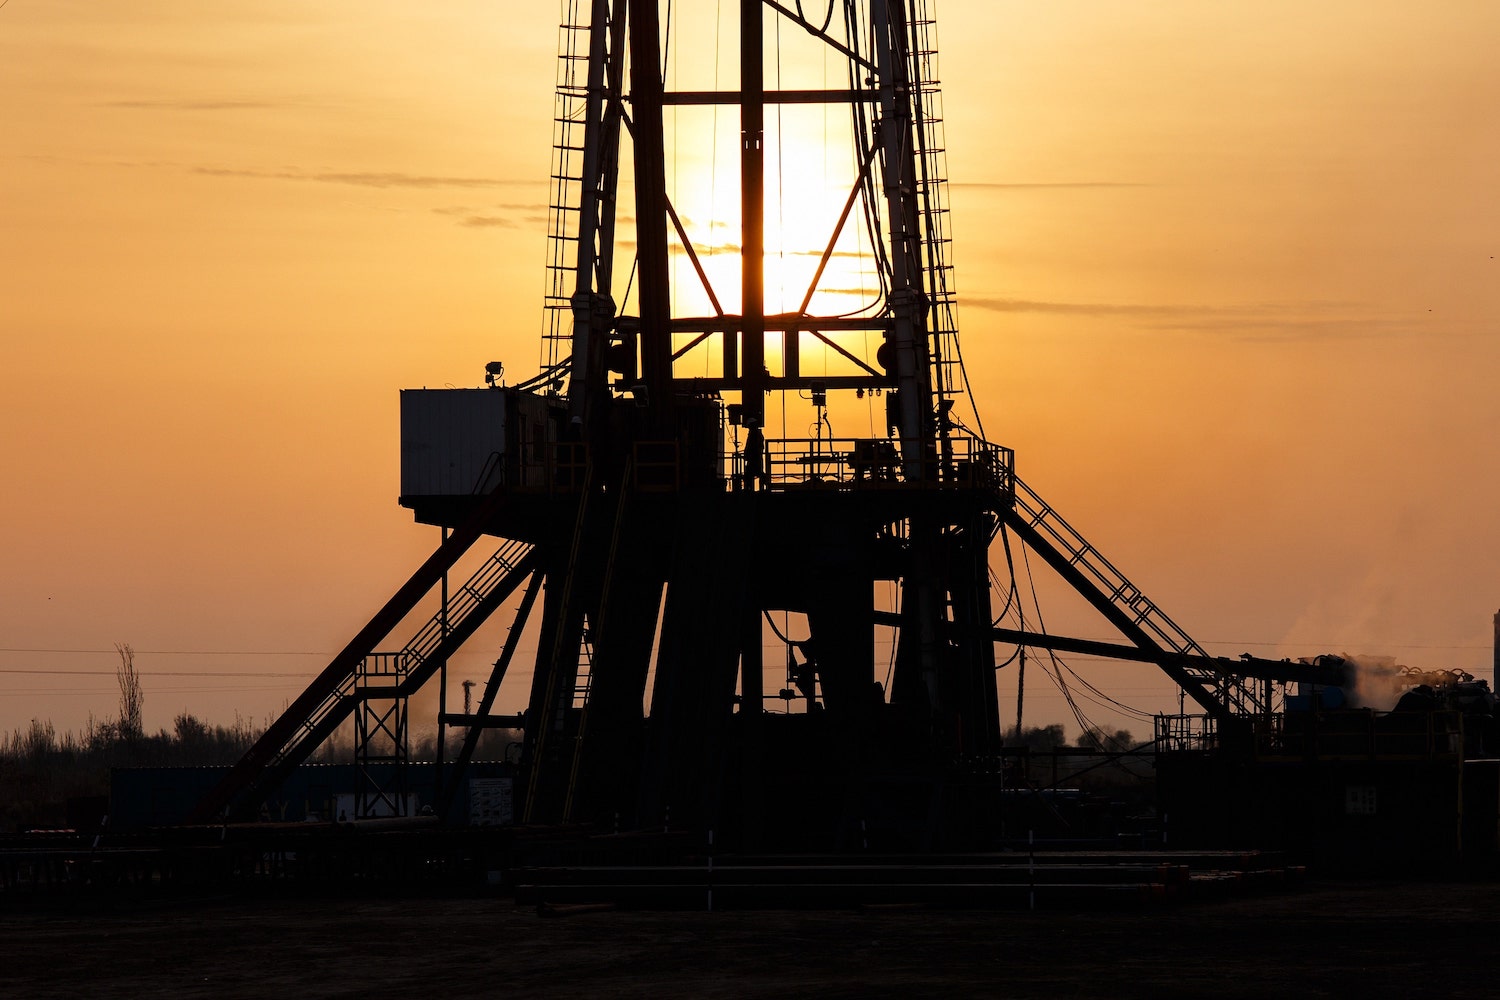 Oil Rig at Sunset with Workers